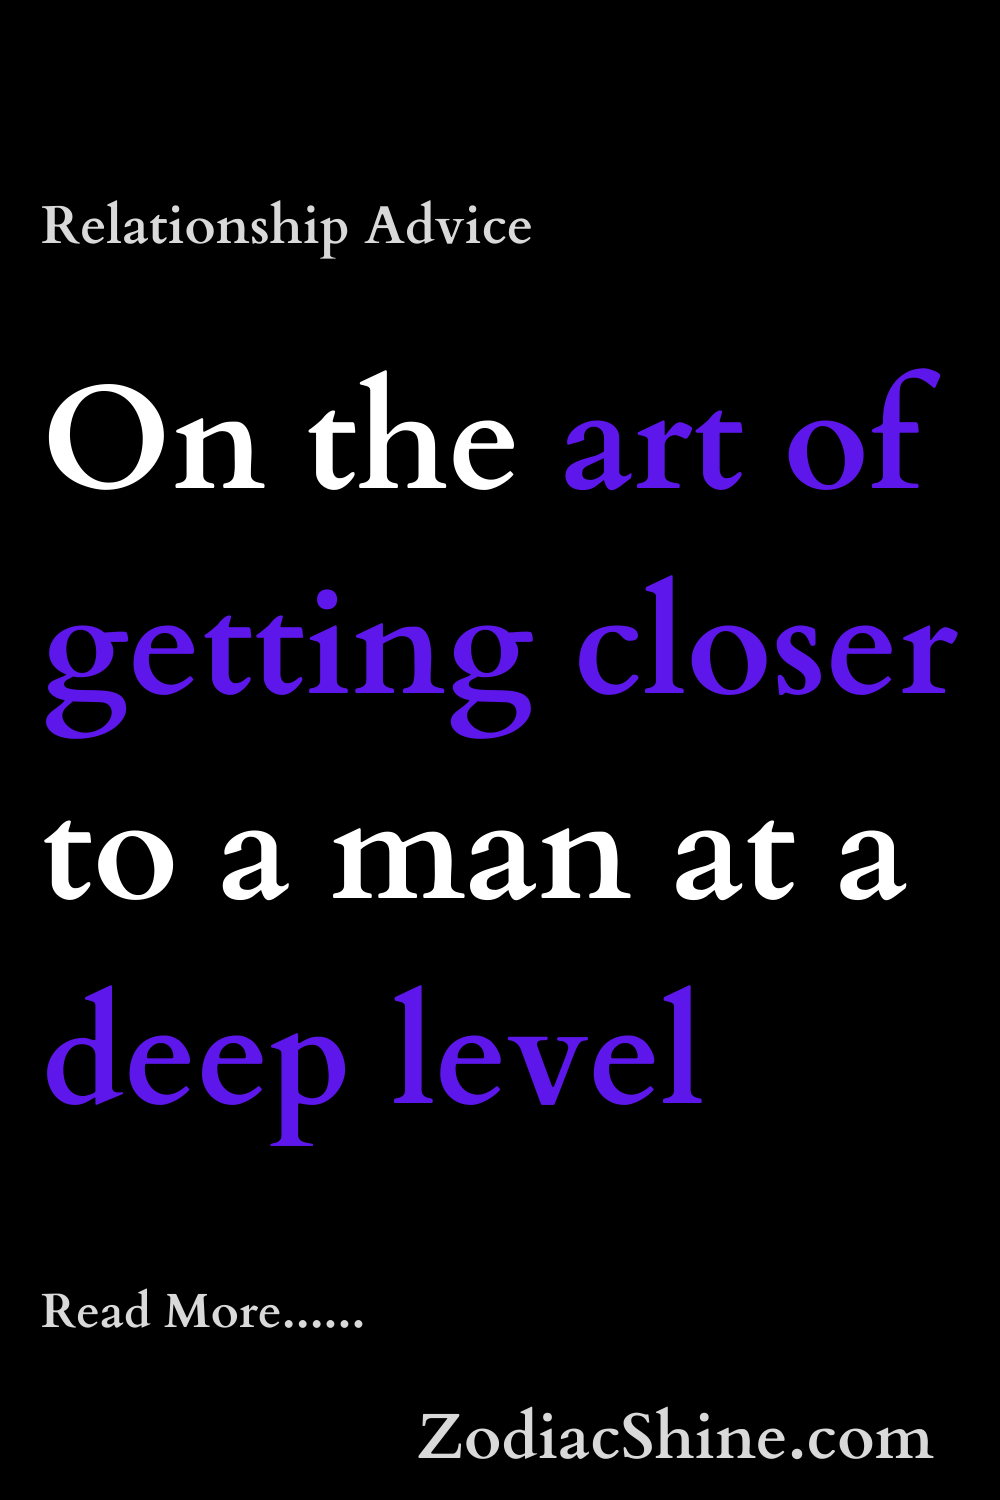 On the art of getting closer to a man at a deep level